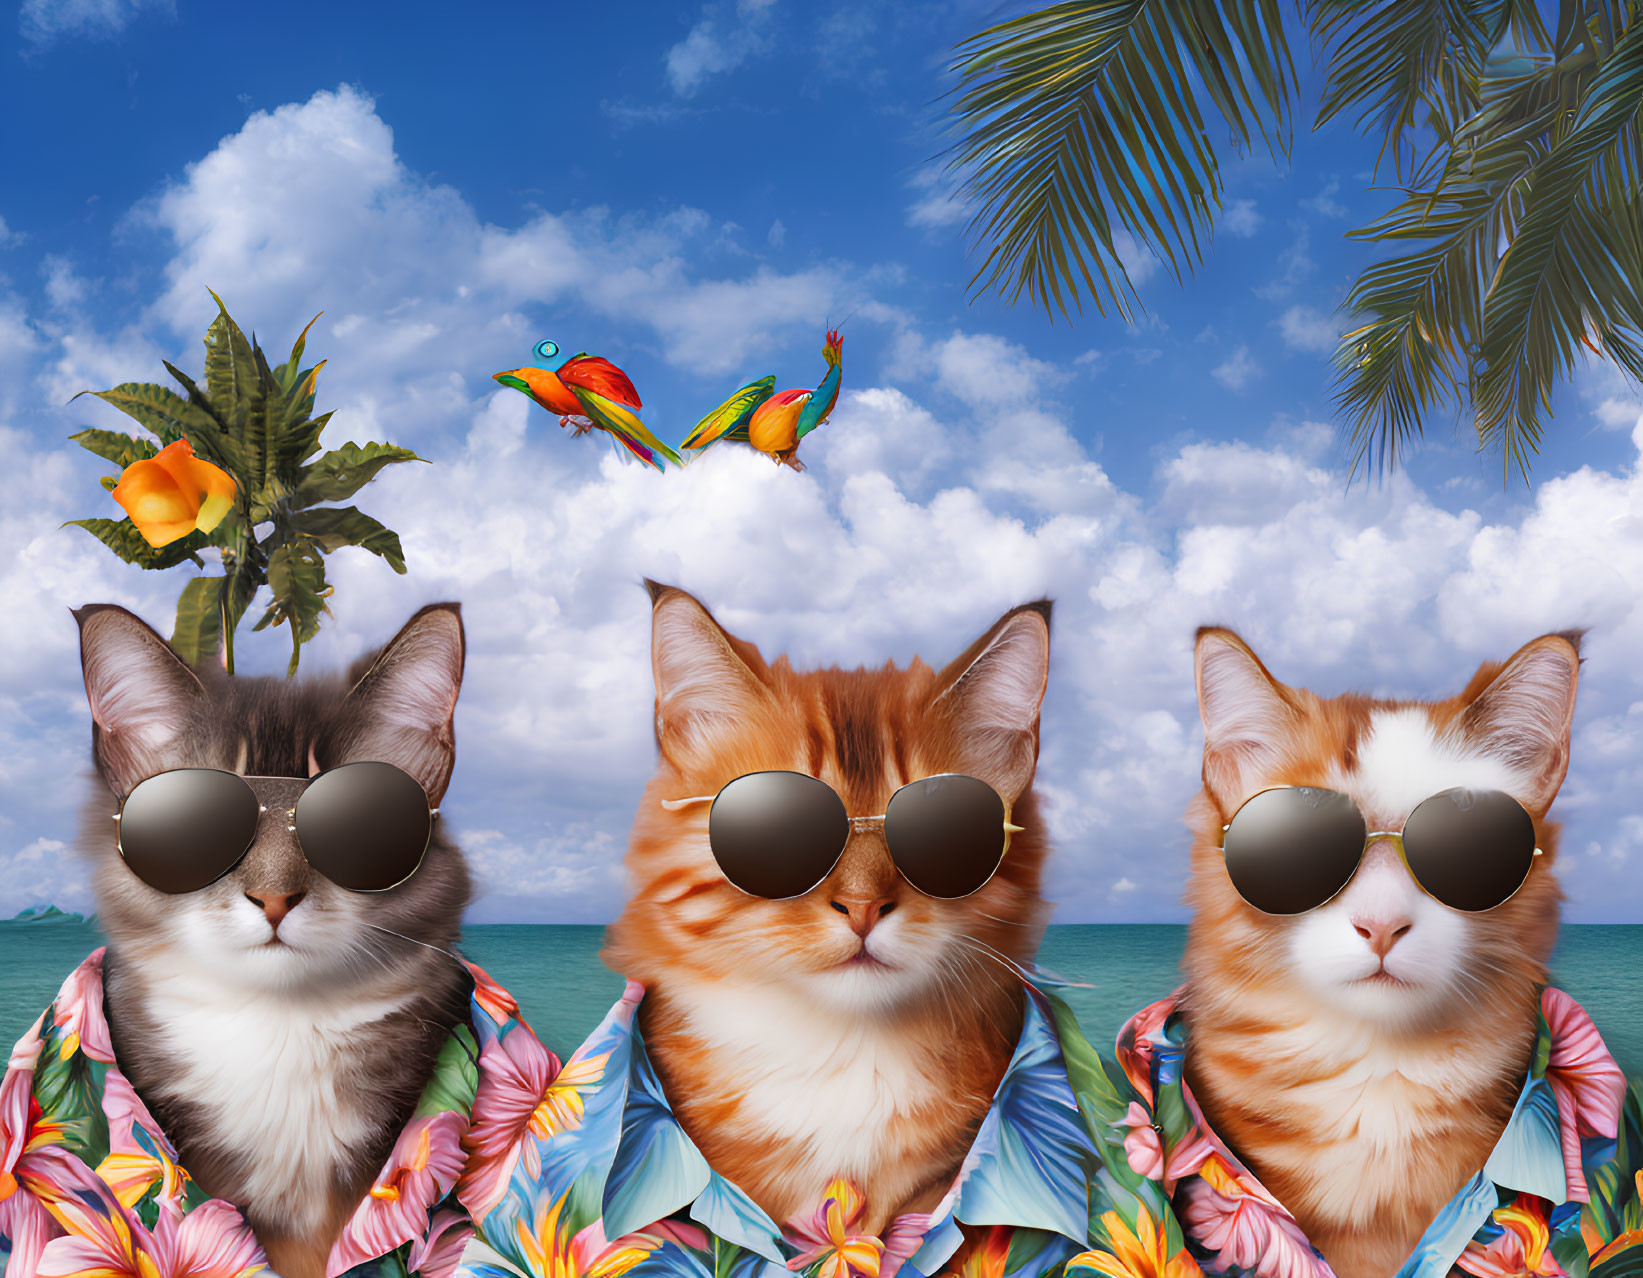 Three cats in sunglasses and tropical shirts under clear blue sky with flying birds.